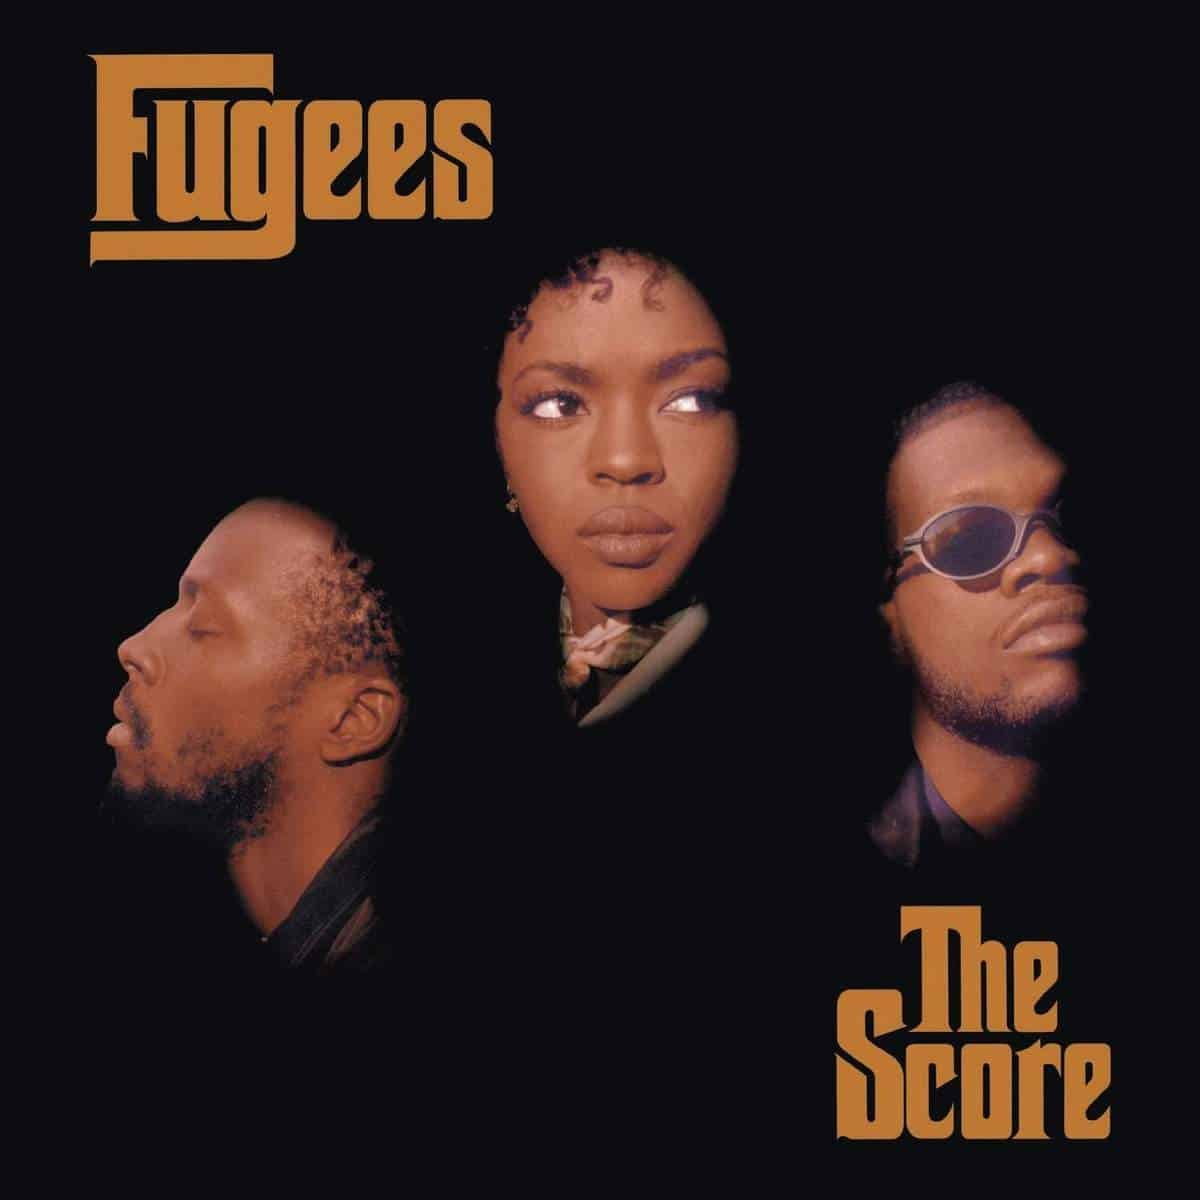 Fugees: The Score Vinyl. Norman Records UK